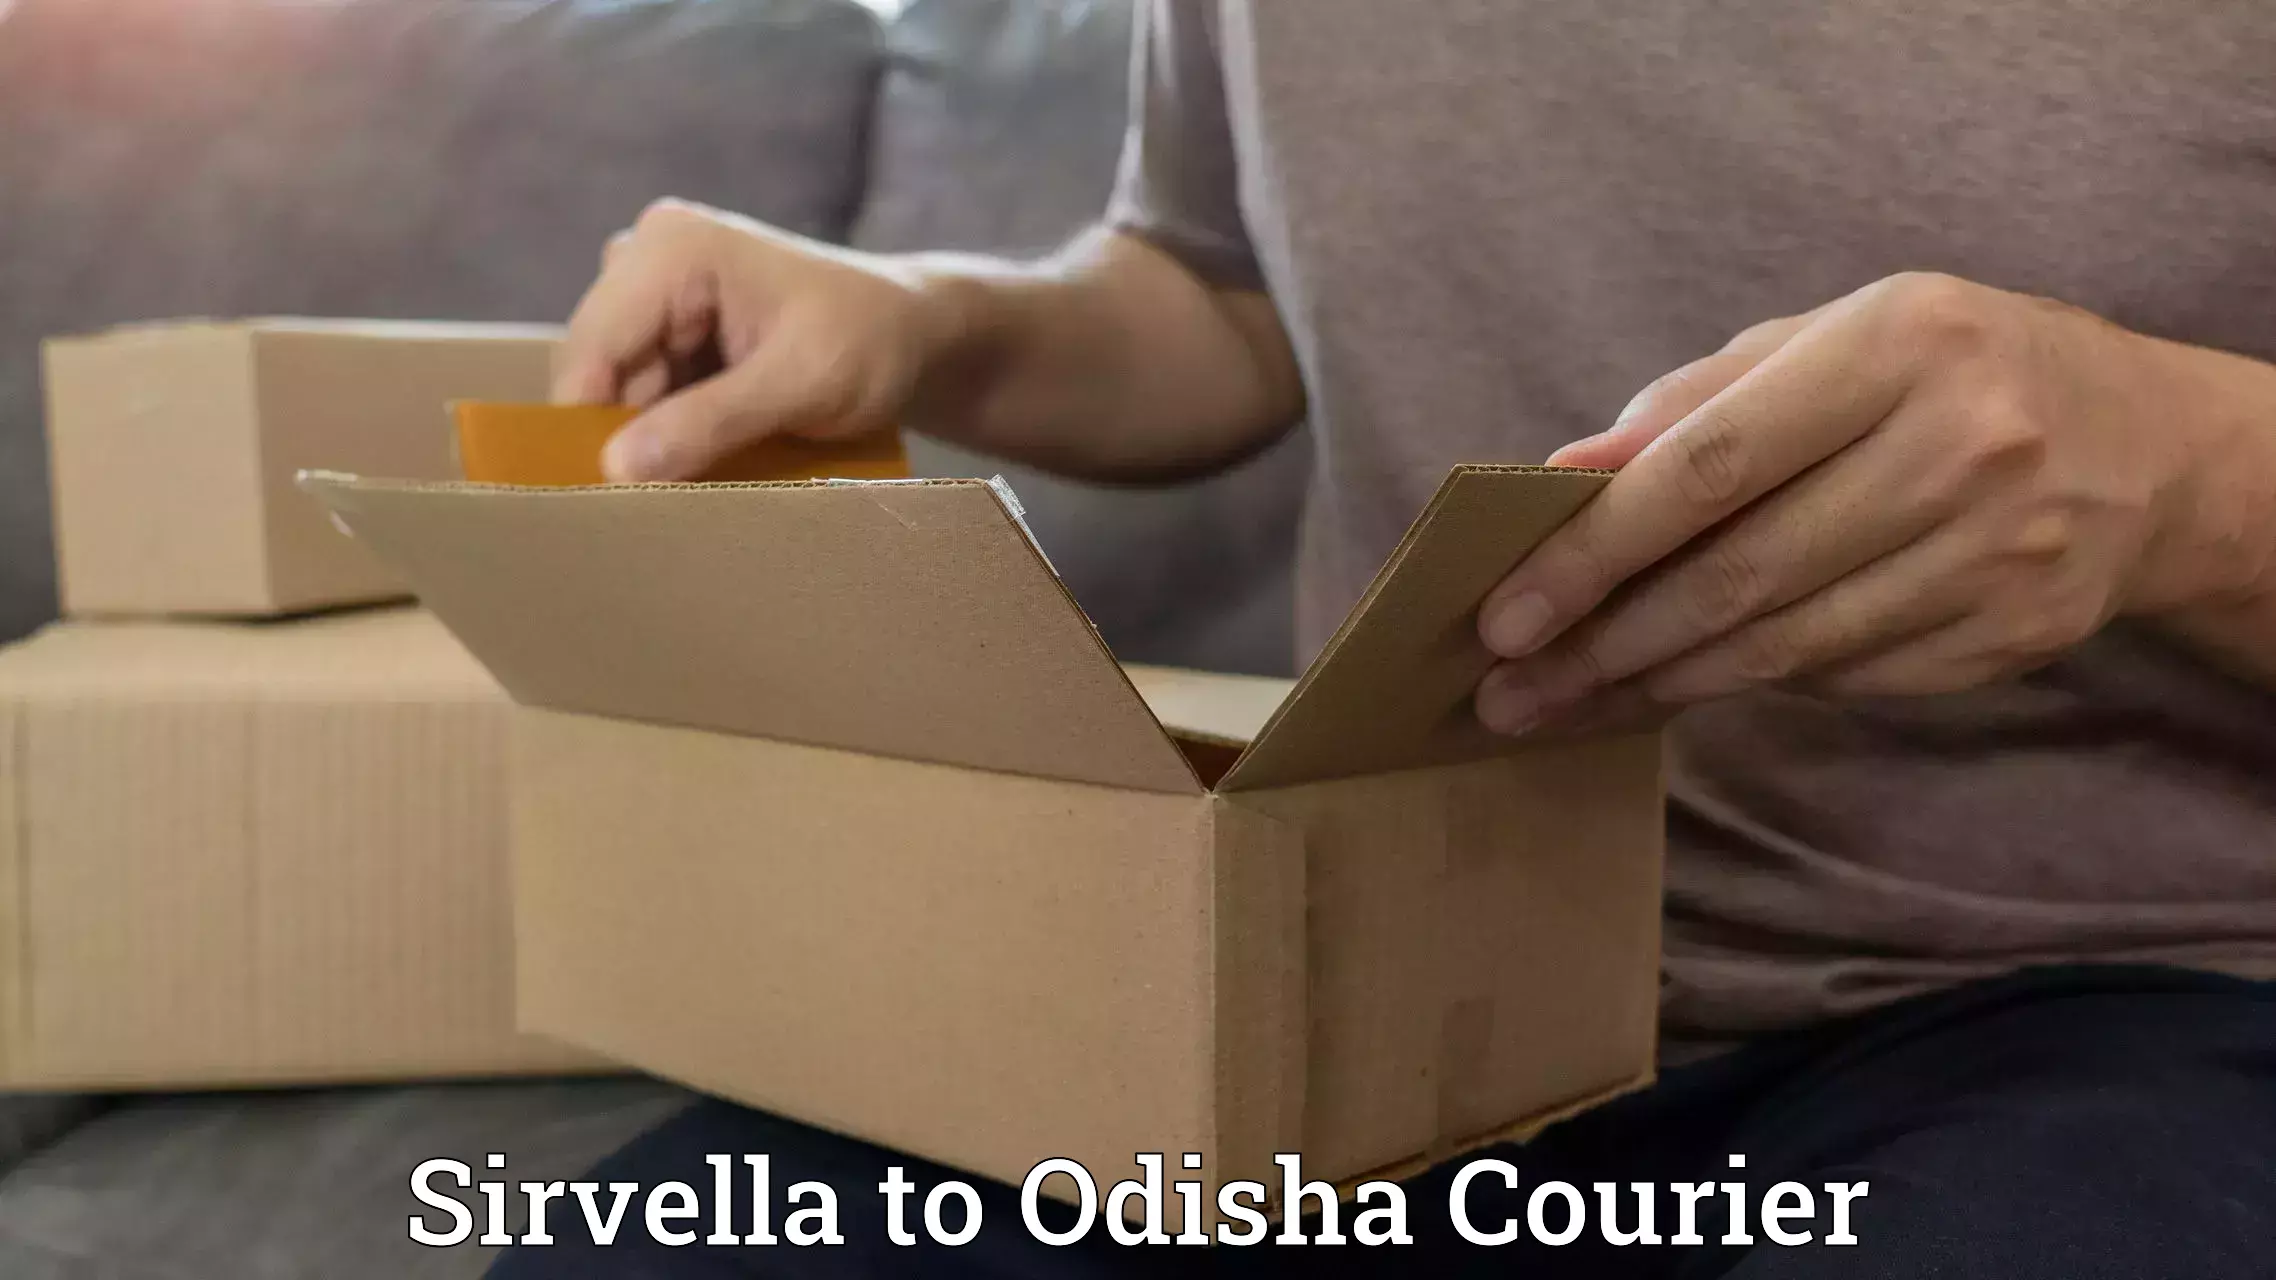 Professional courier handling Sirvella to Muribahal